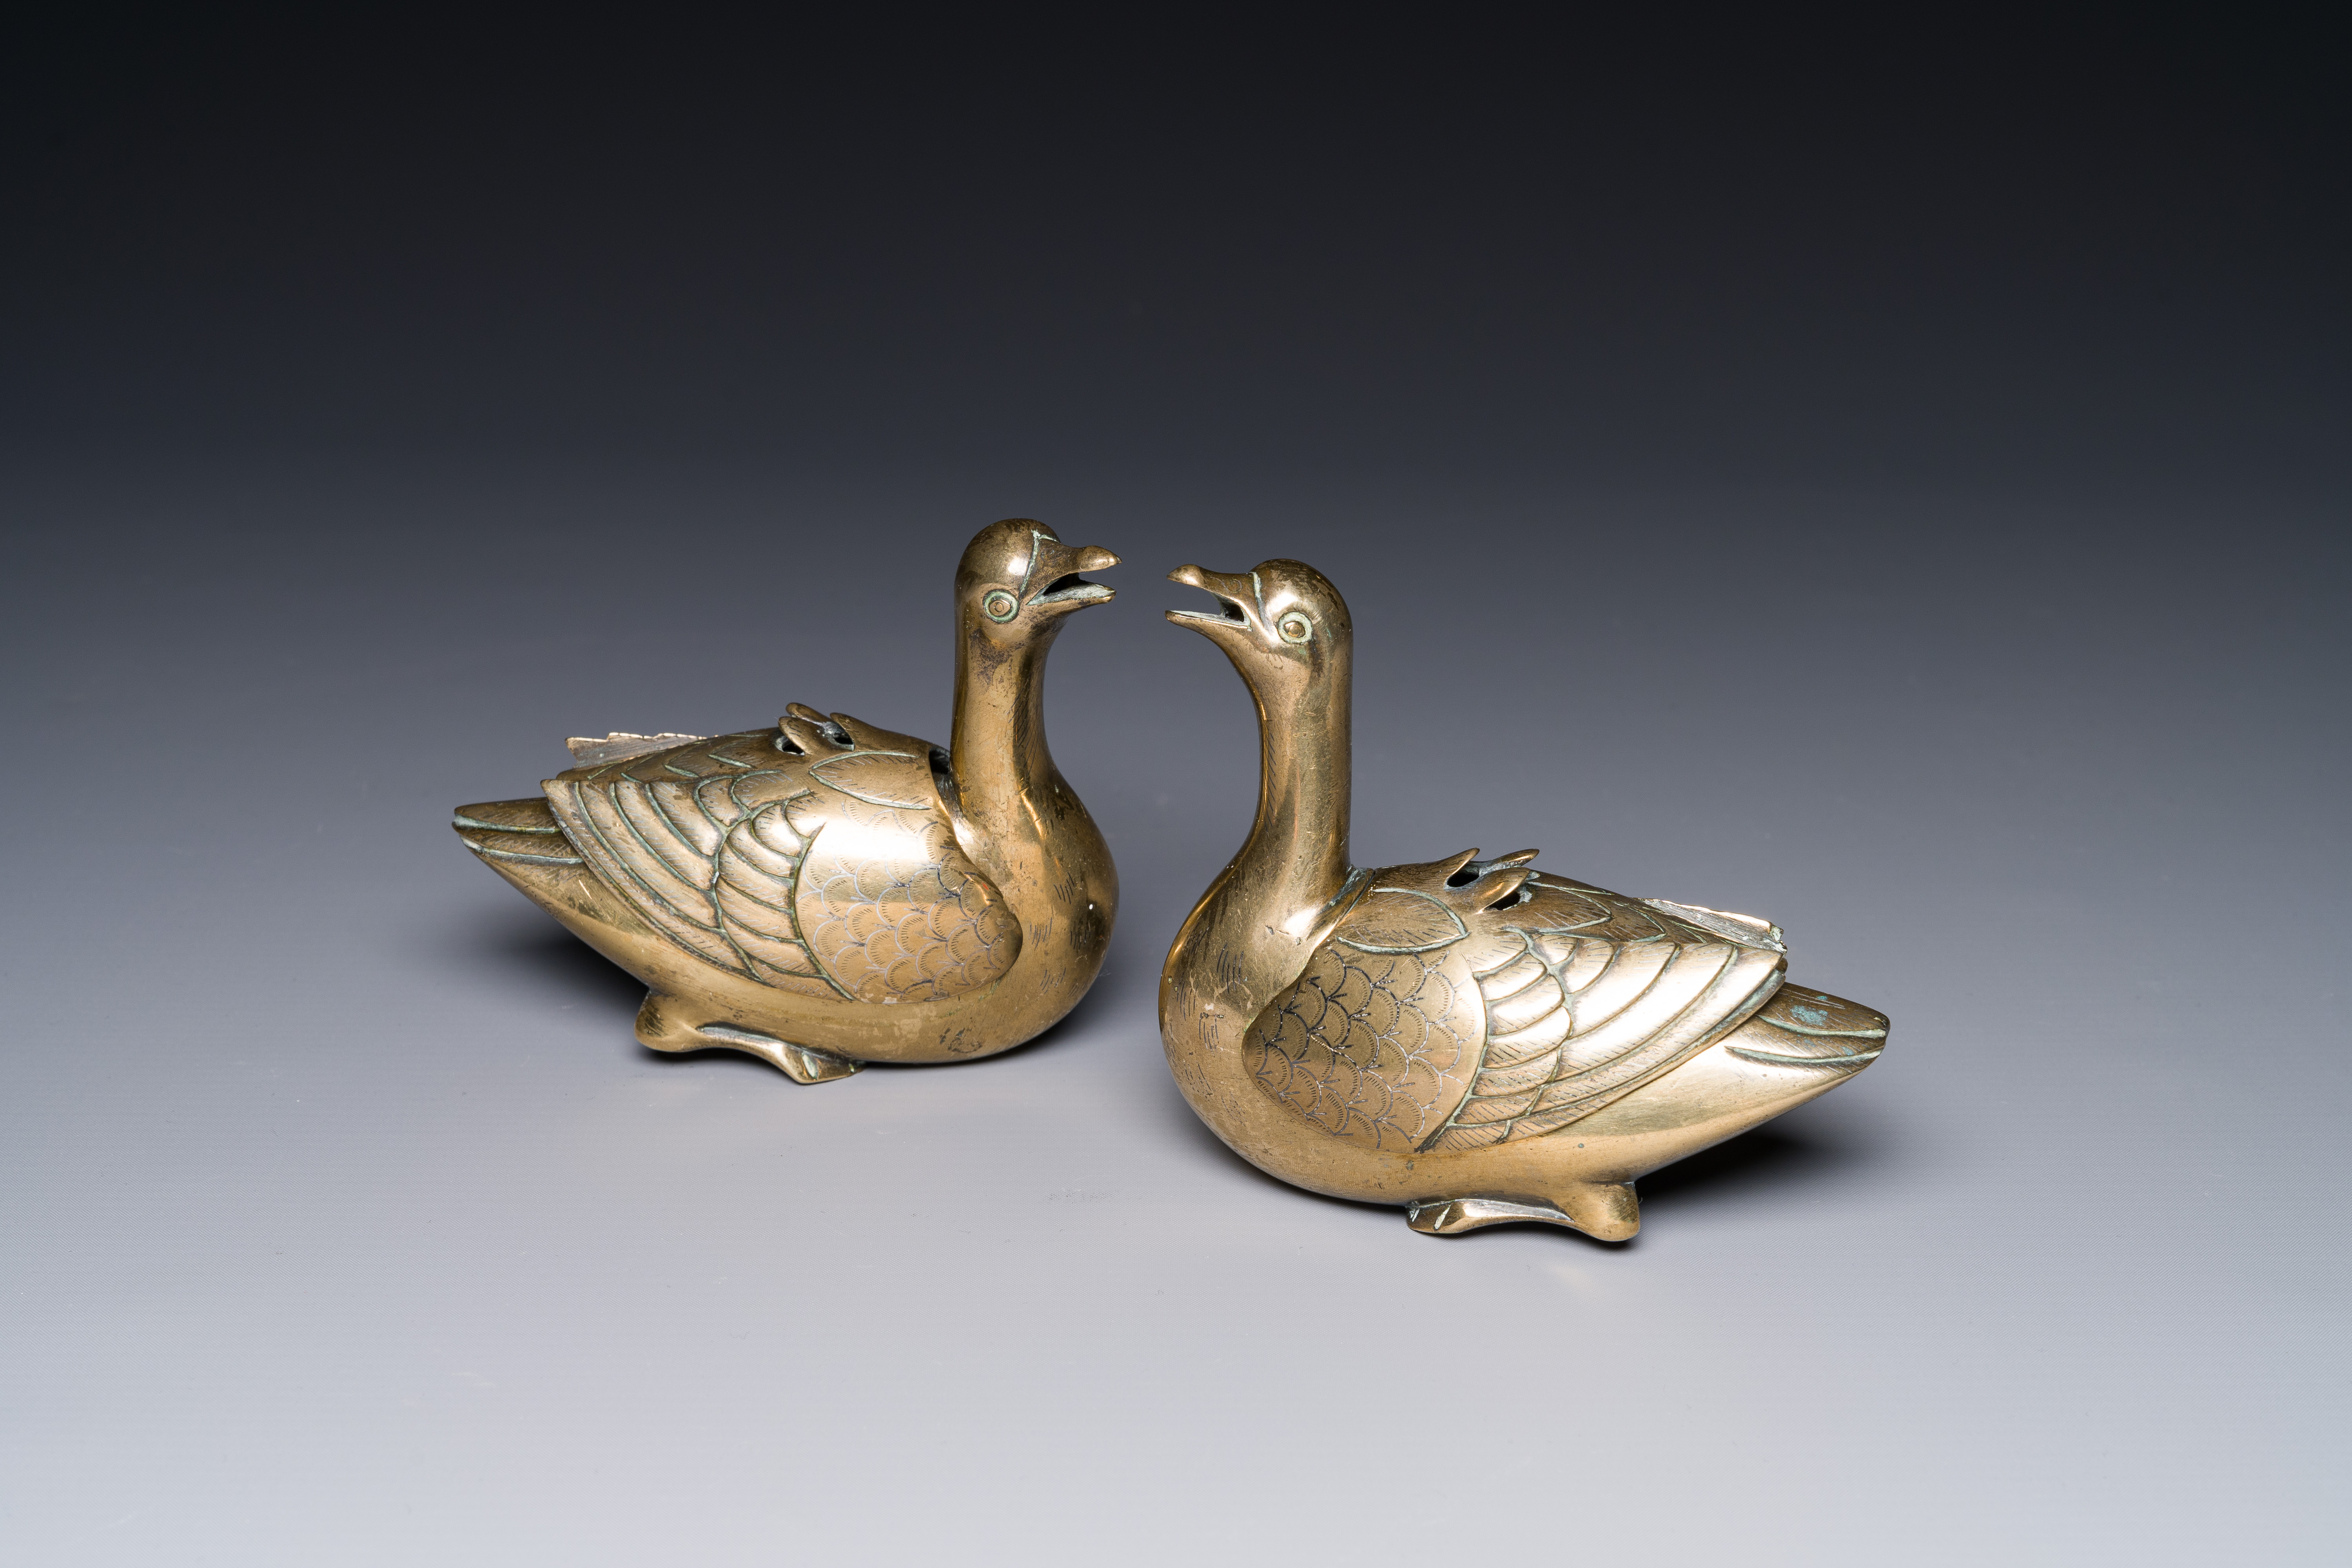 A pair of Chinese silver-inlaid bronze duck-form water droppers, Qing